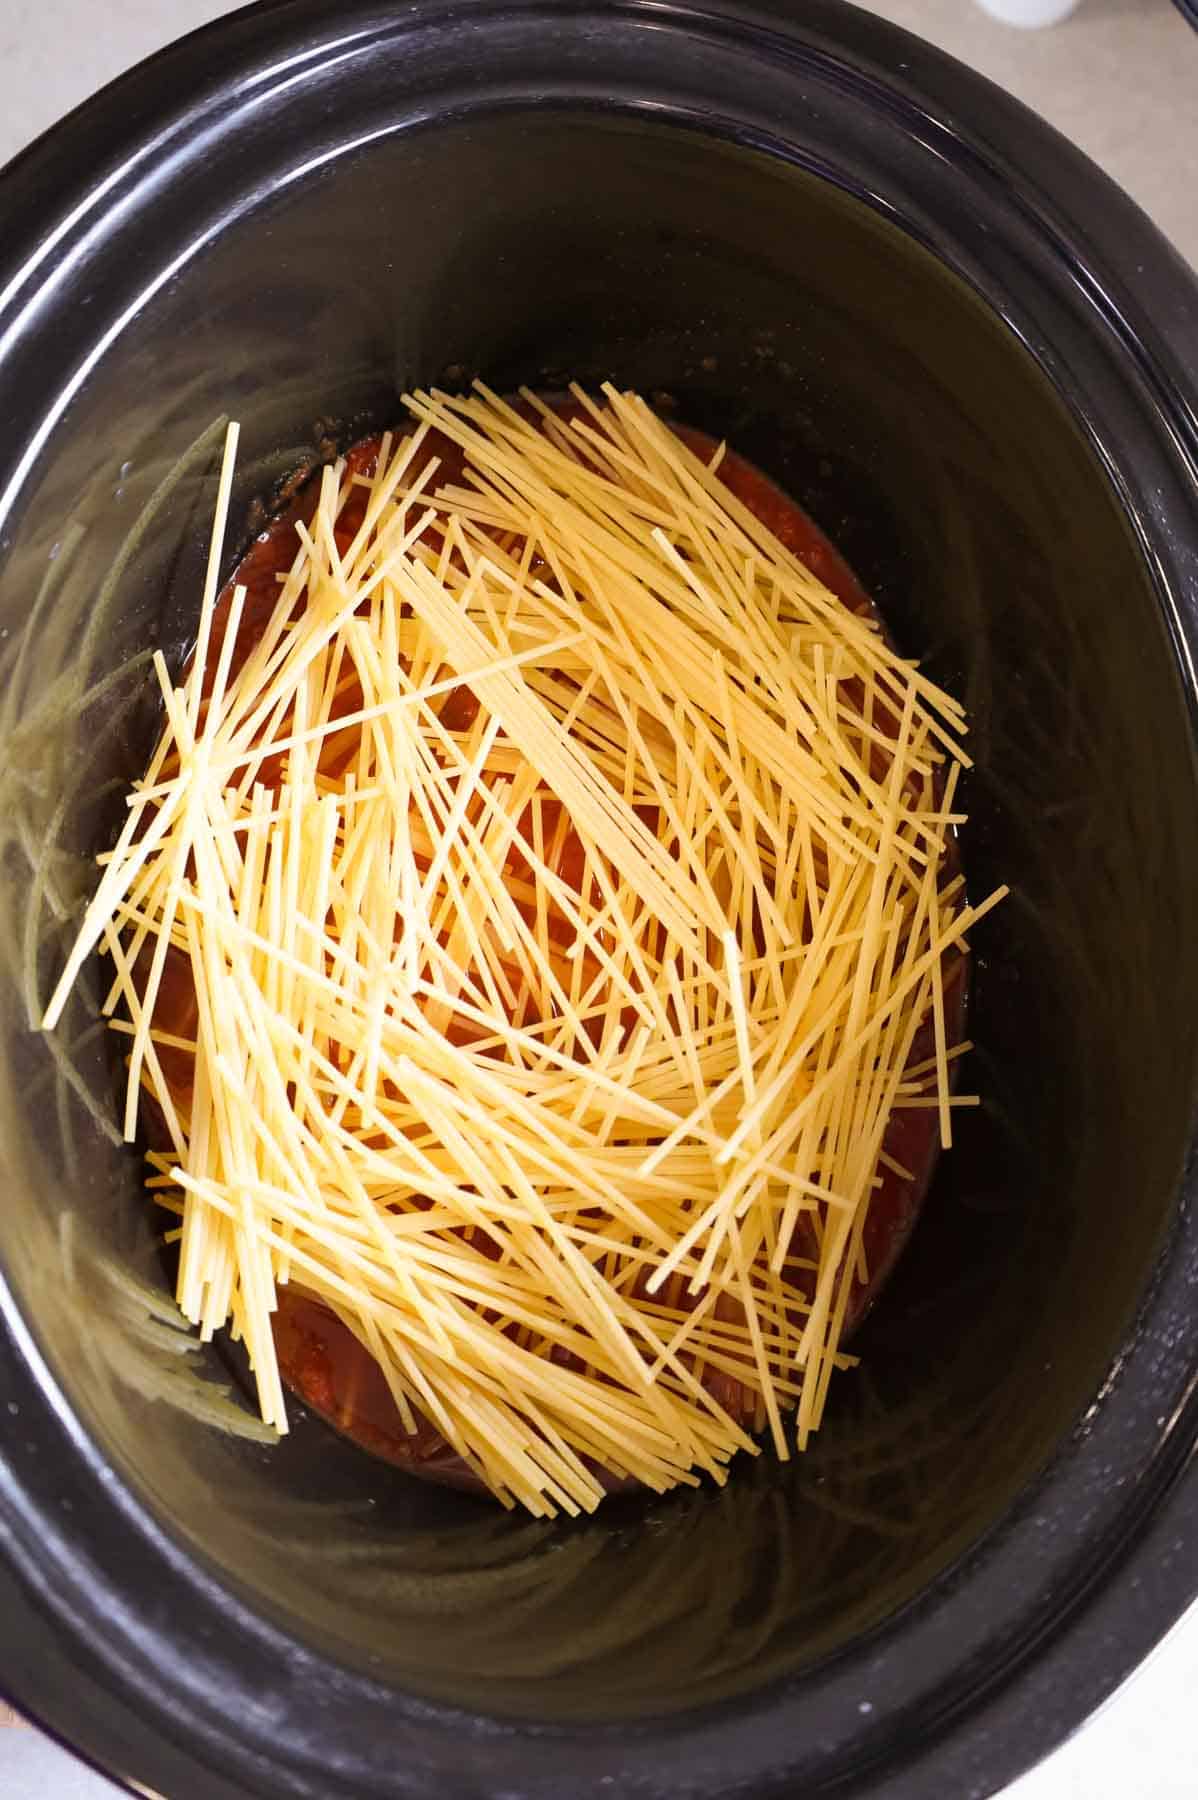 uncooked spaghetti noodles on top of marinara sauce in a crock pot